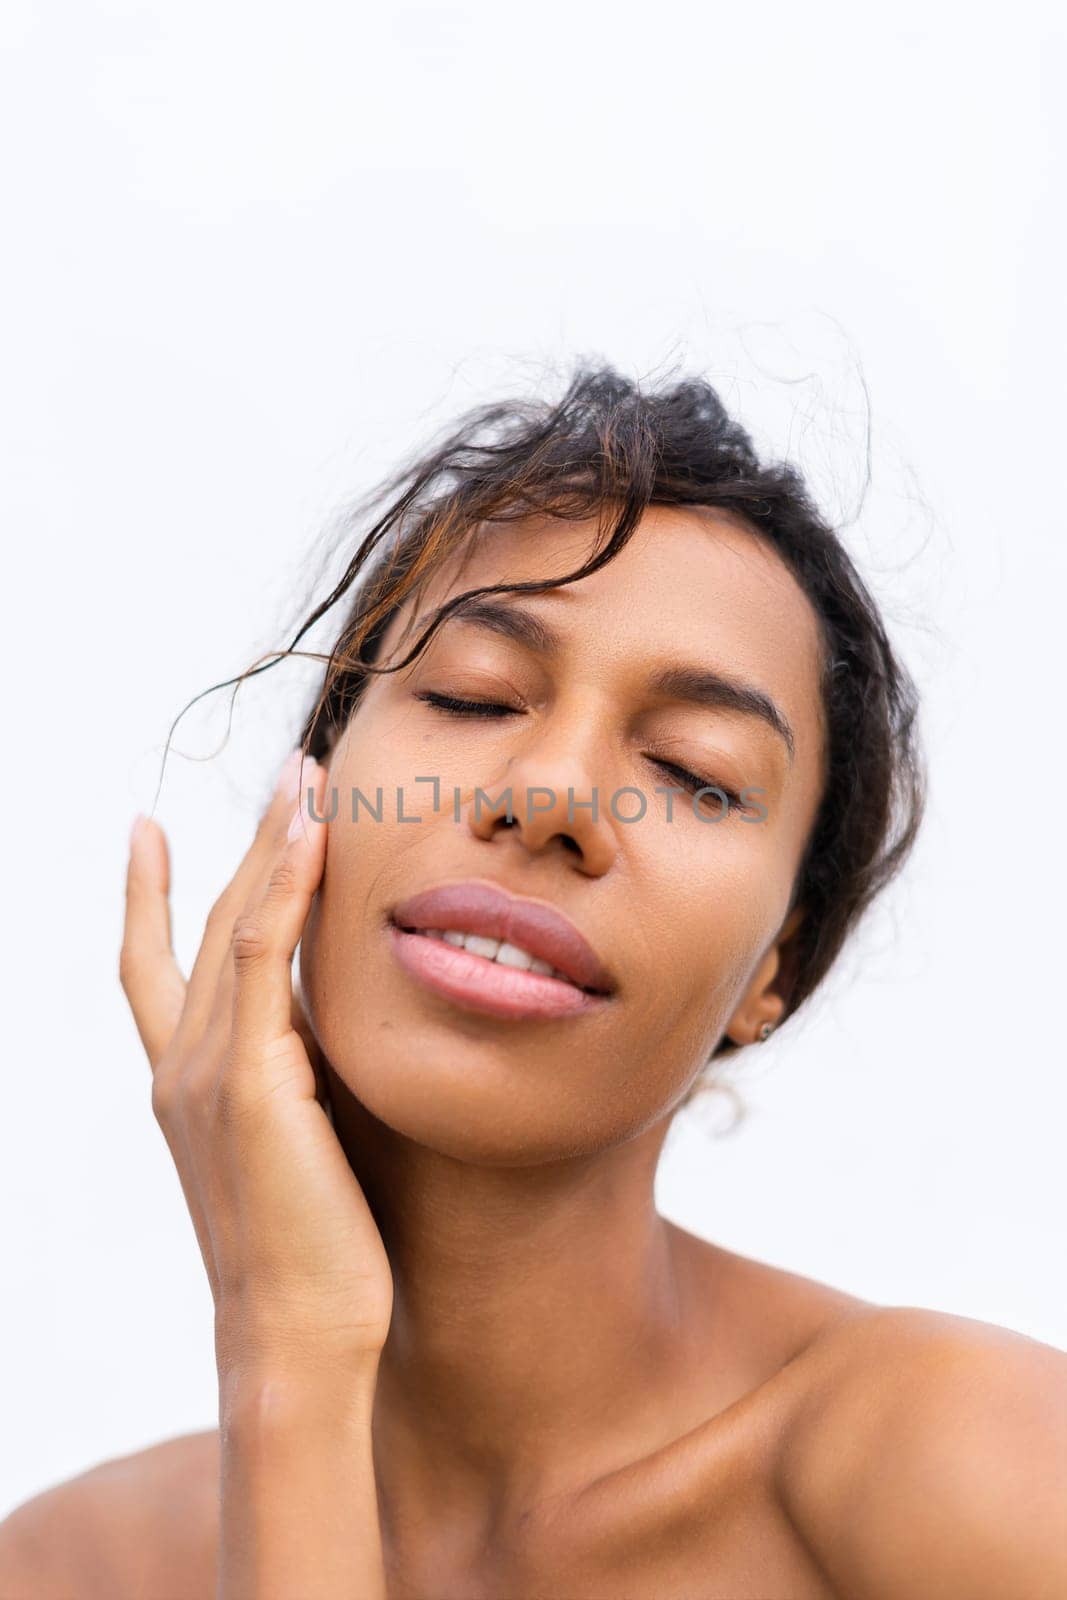 Beauty portrait of young topless african american woman with bare shoulders on white background with perfect skin and natural makeup positive